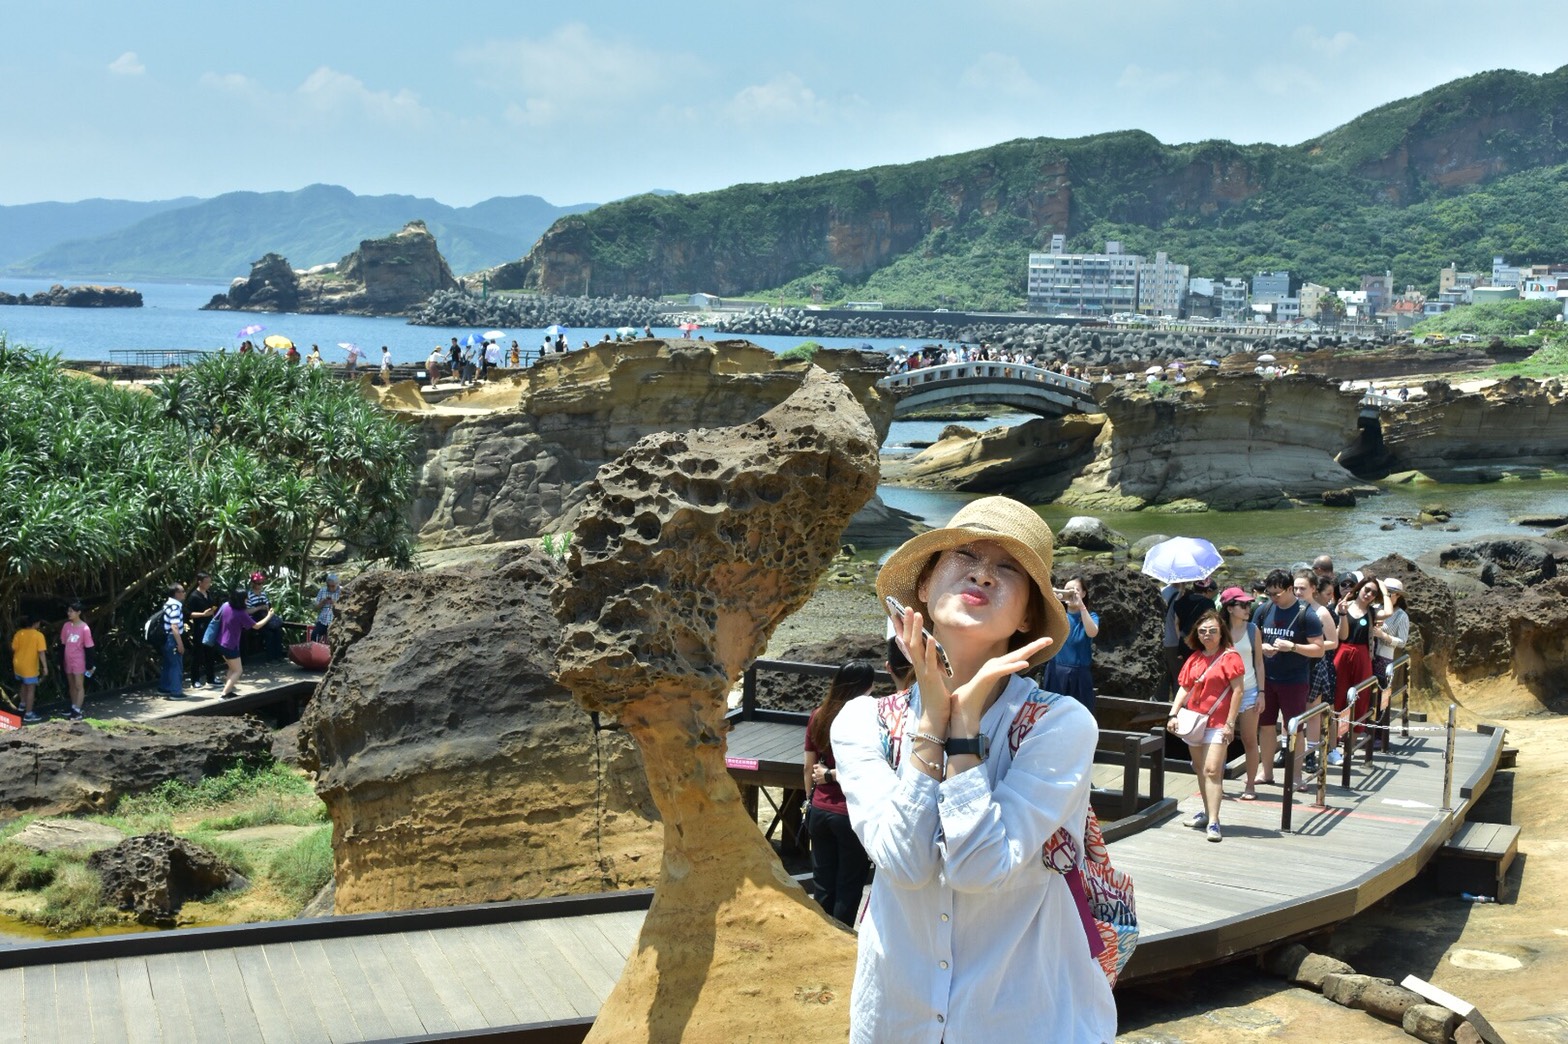 【Taipei Private Tour】Romantic dating trip with the Yehliu Queen’s head